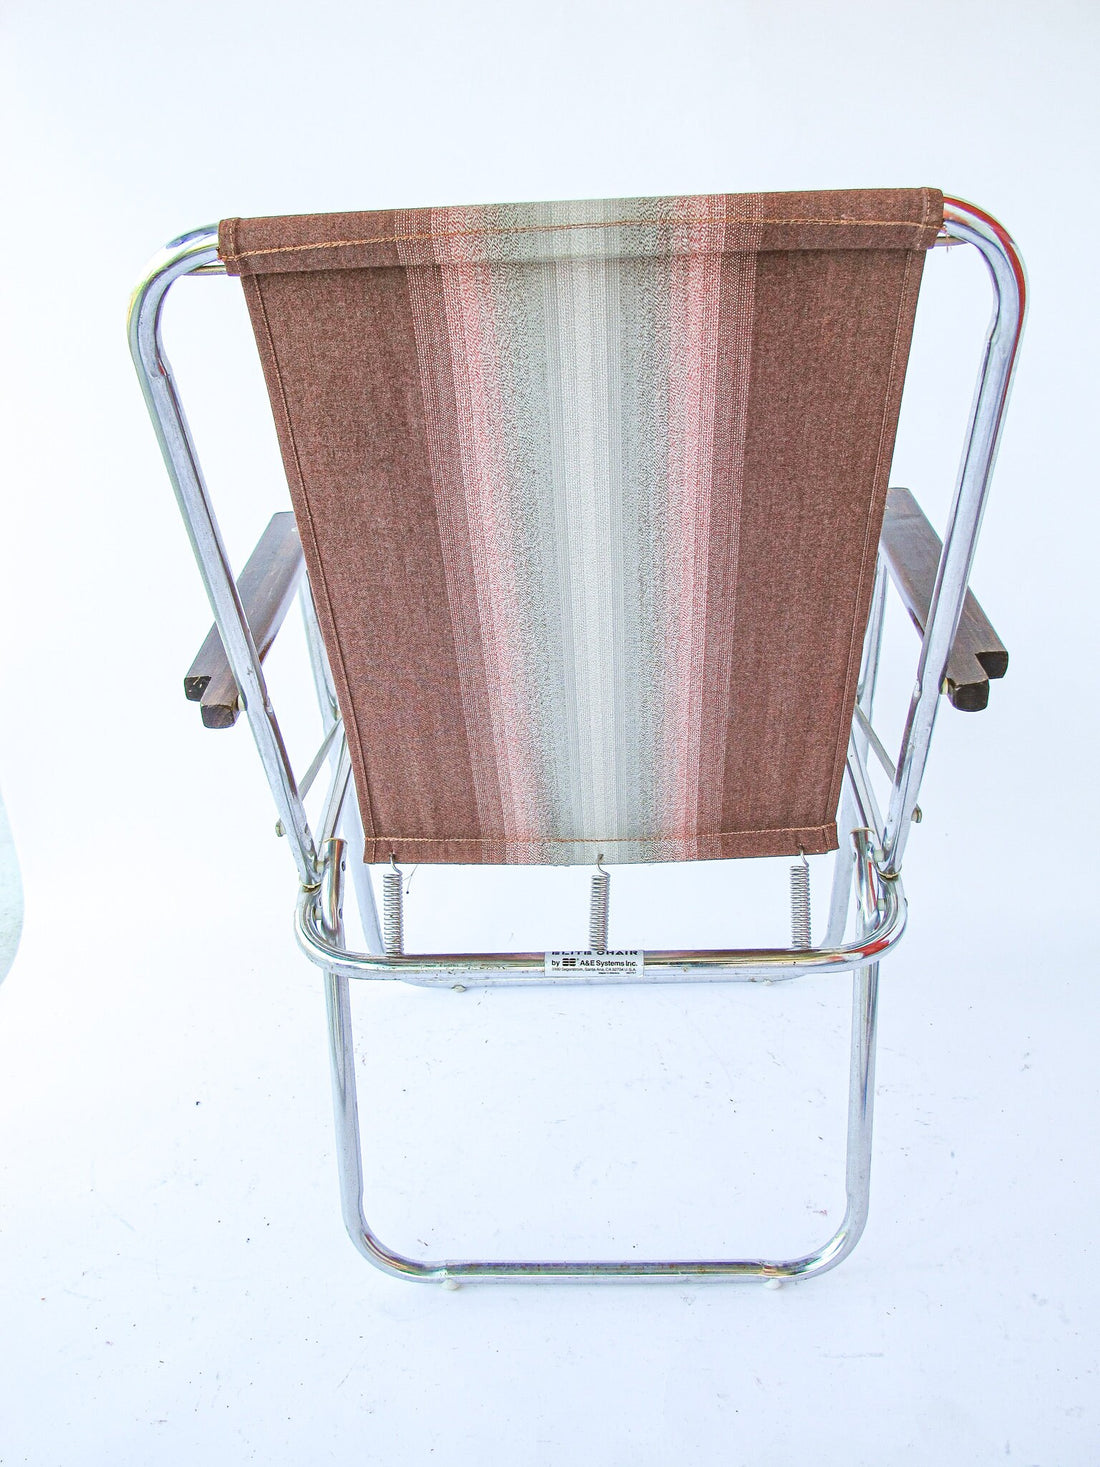 Canvas Folding Lawn Chairs with Metal Frames and Wood Arm Rests ( 2 Available and Sold Separately)